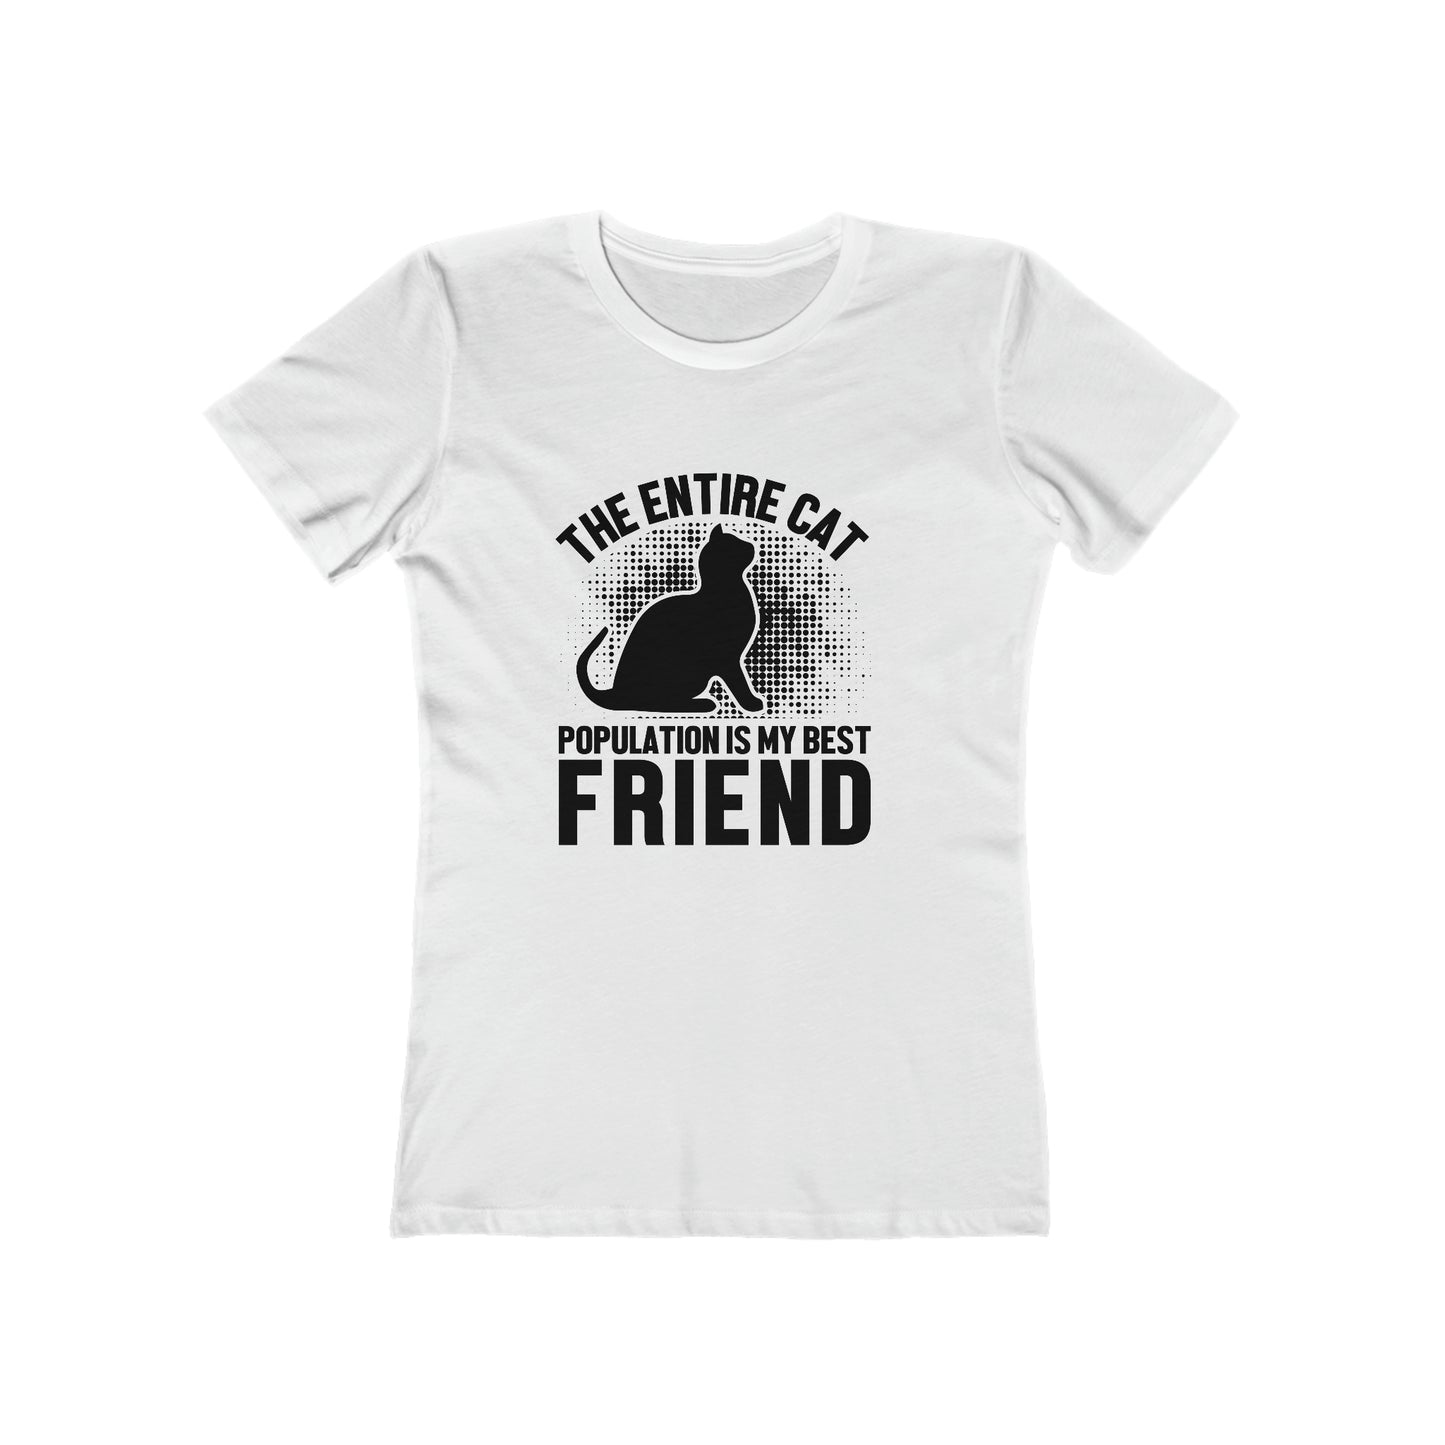 The Entire Cat Population Is My Friend - Women's T-shirt